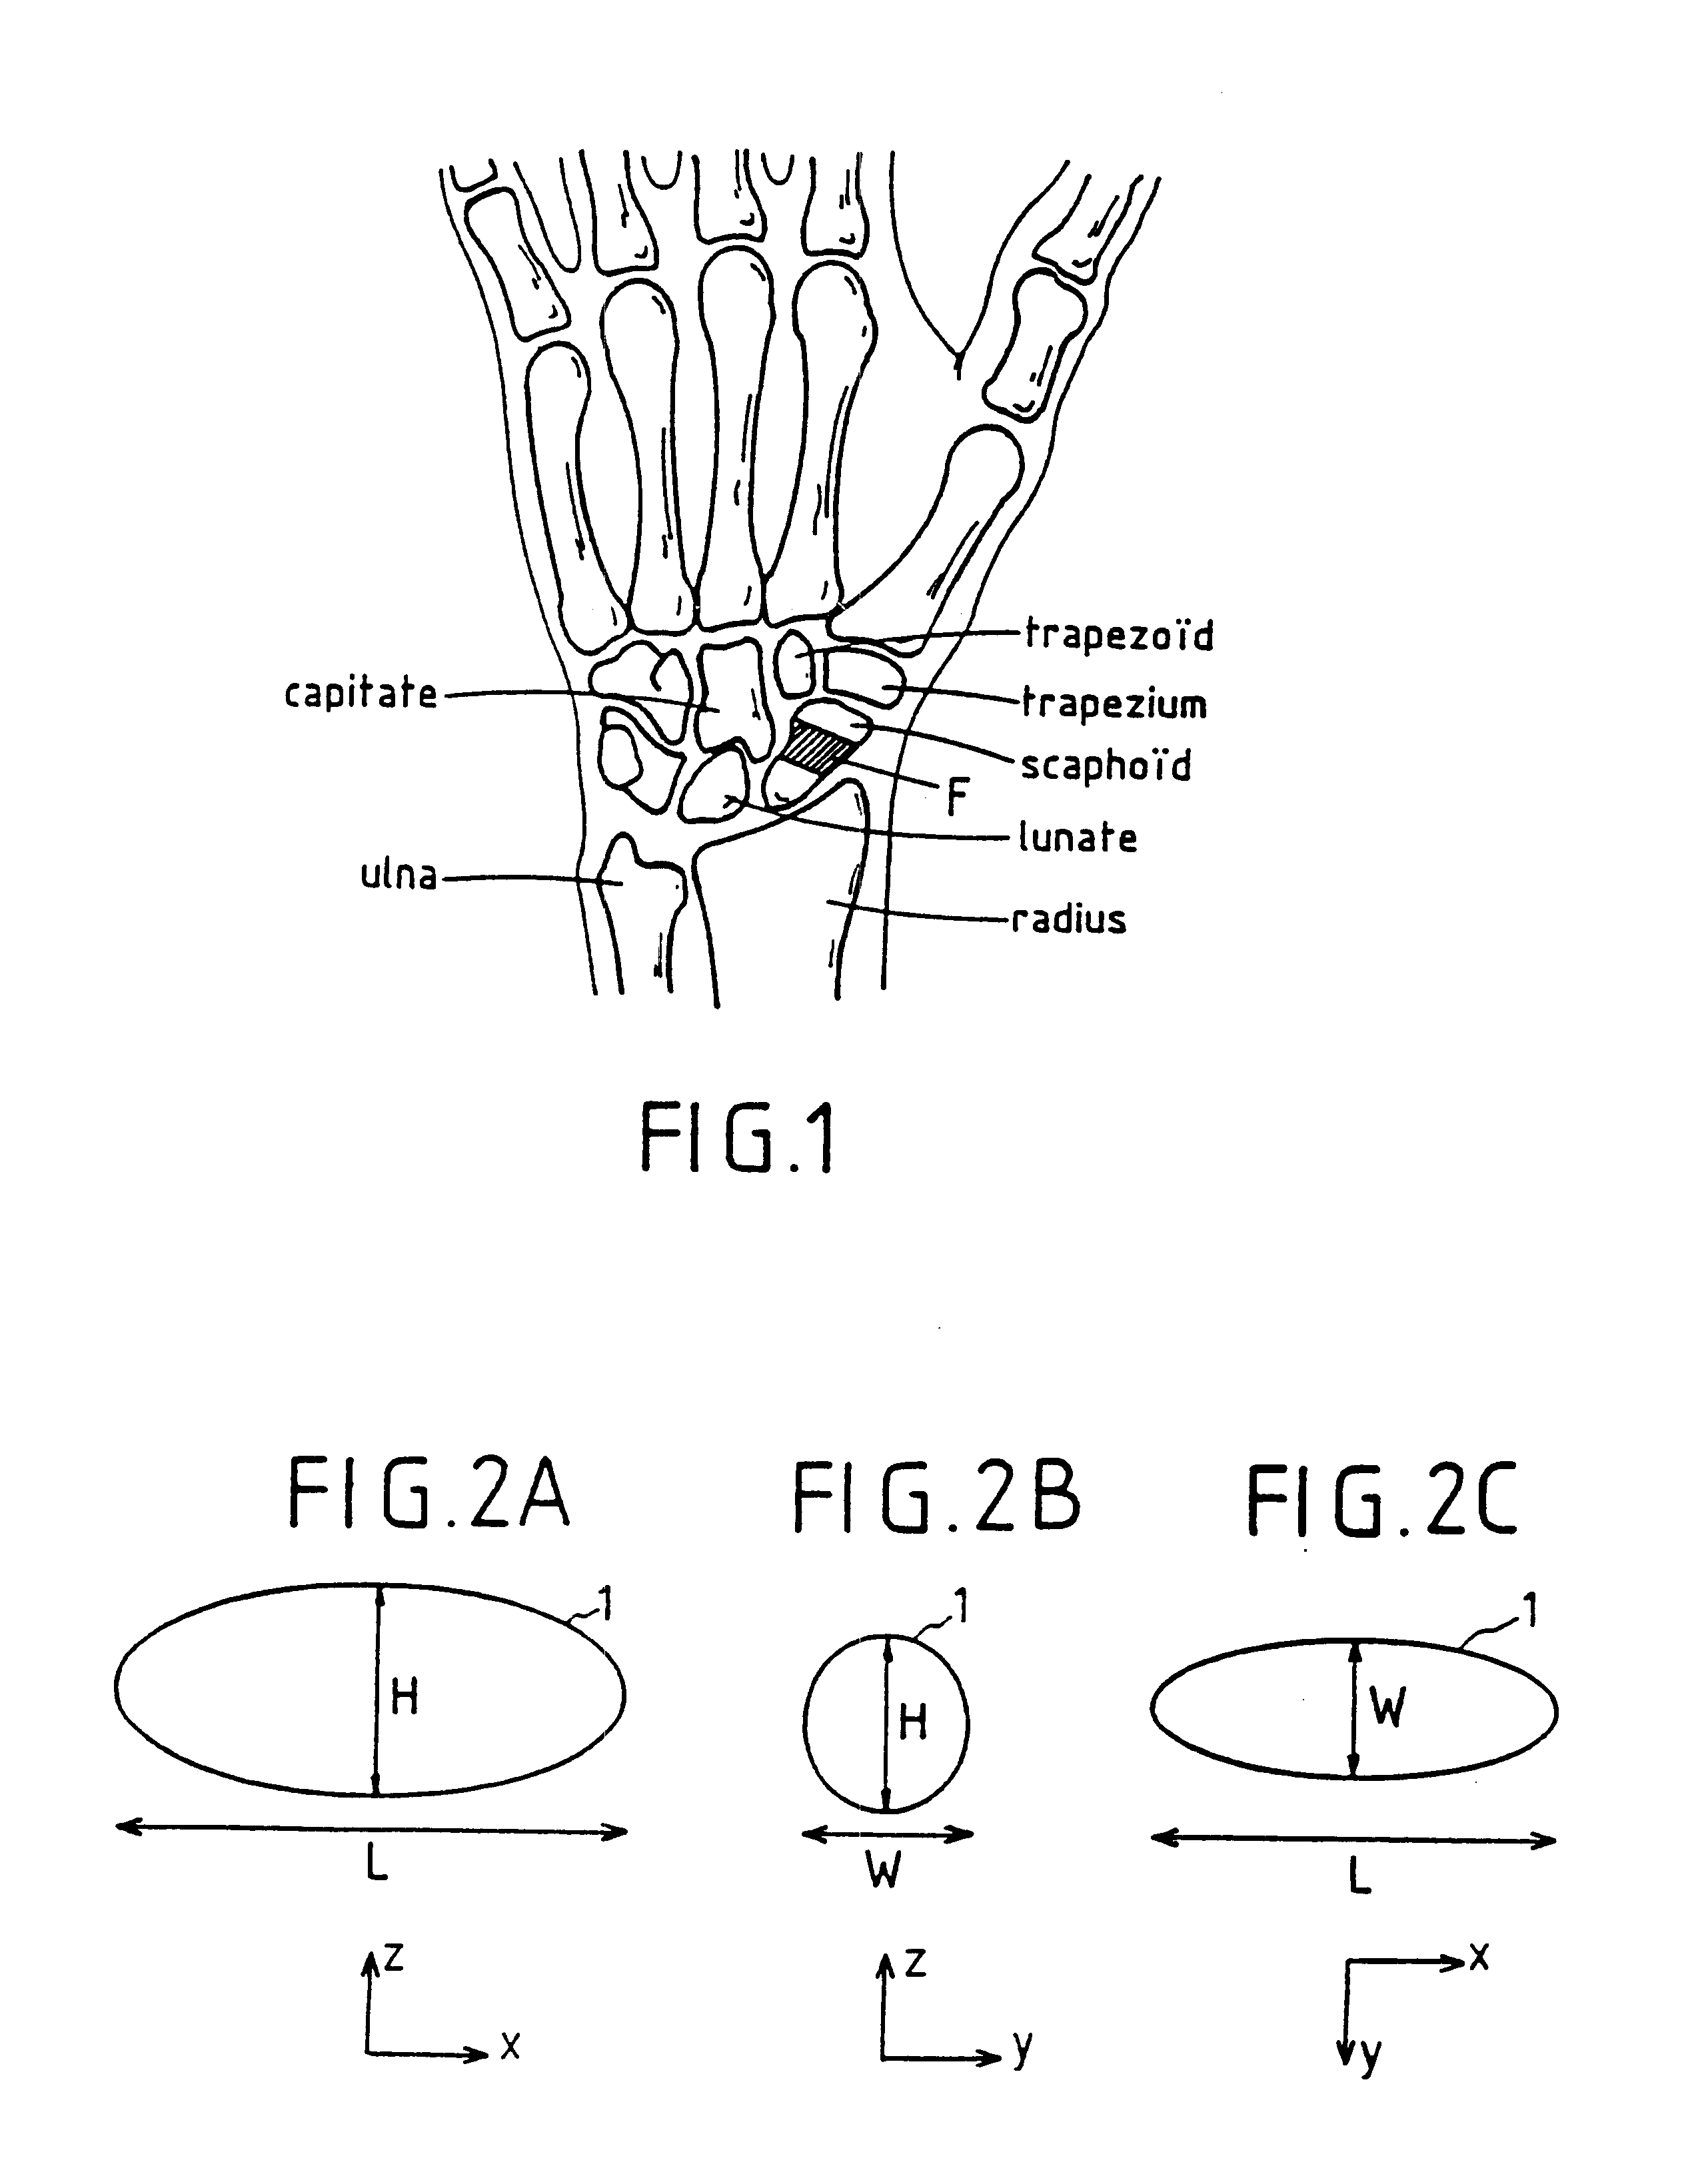 Implant for treating ailments of a joint or a bone